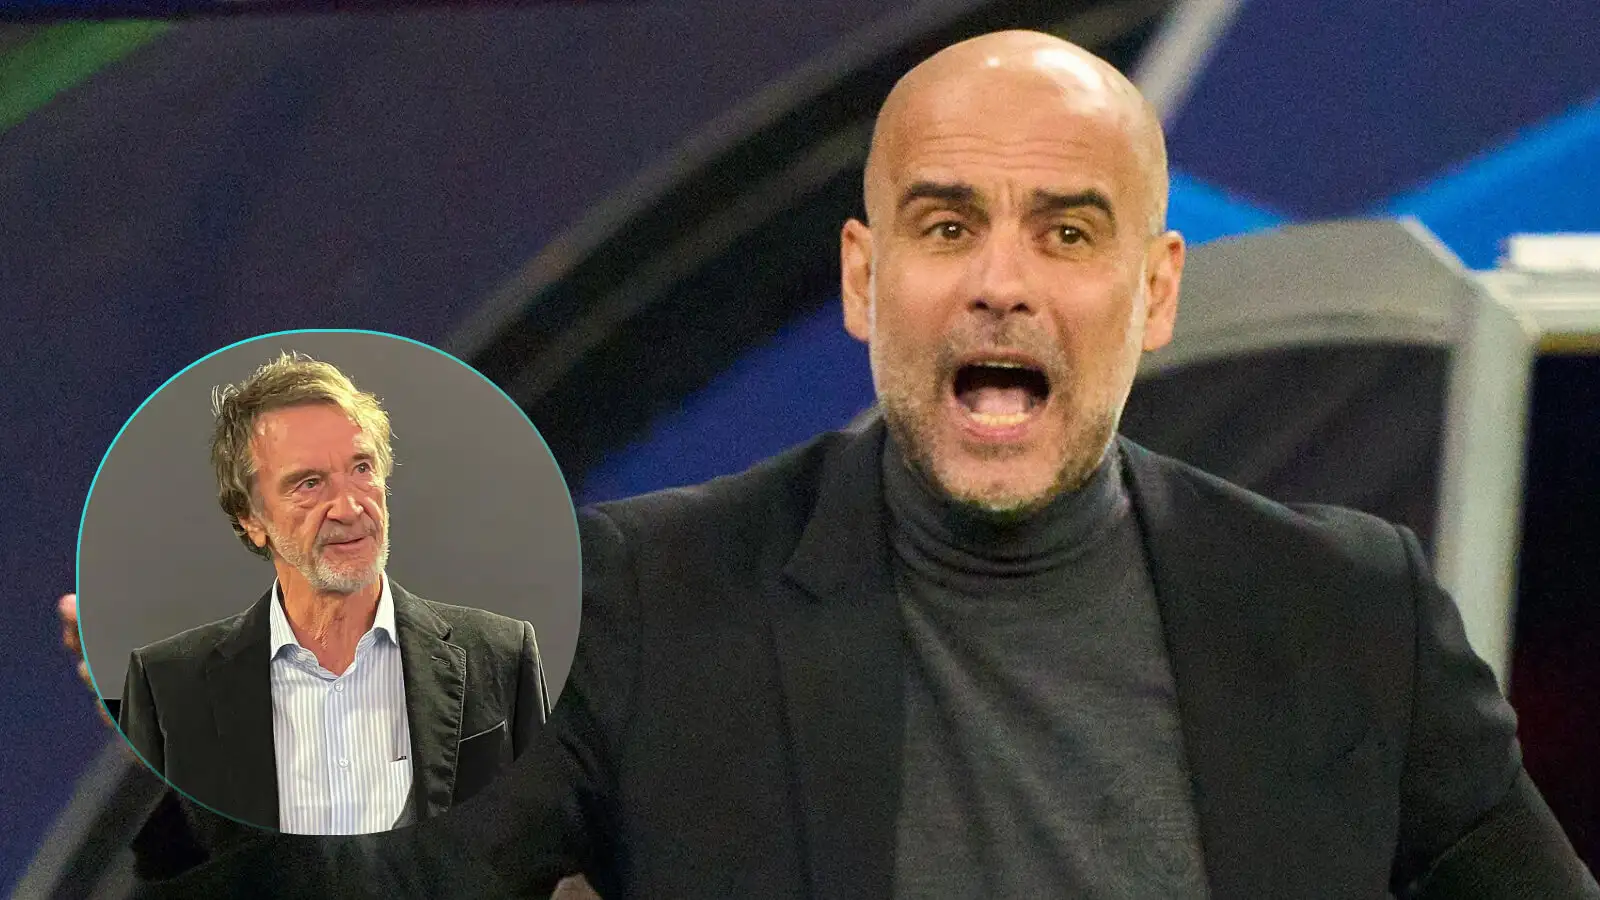 Pep Guardiola intends Manchester United to simplify under Sir Jim Ratcliffe's stewardship.